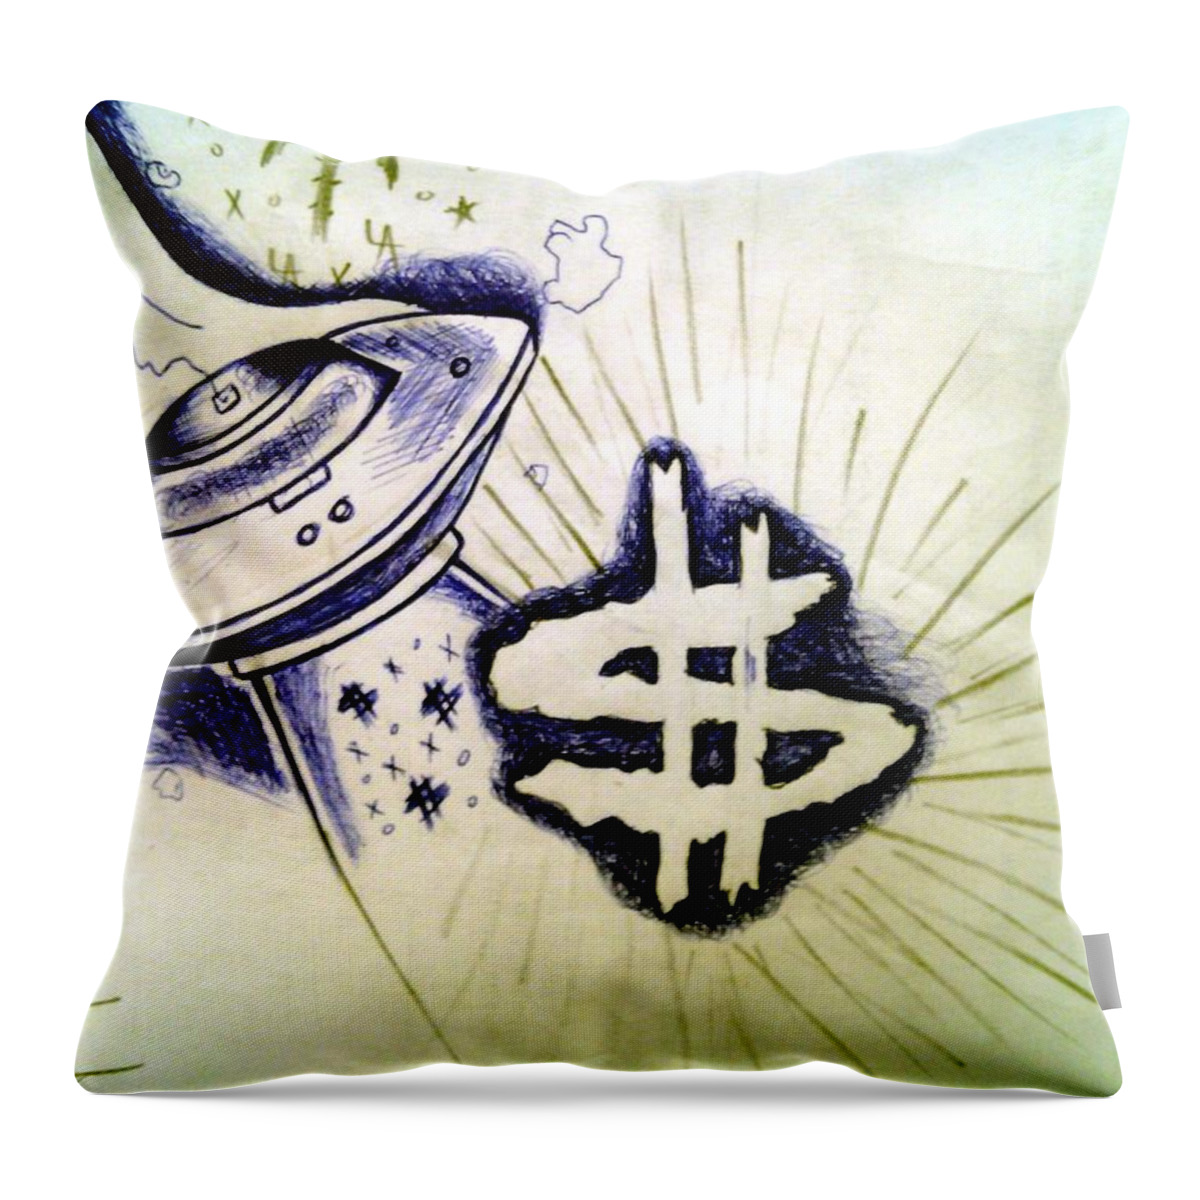 Black Art Throw Pillow featuring the drawing Untitled 9 by A S 